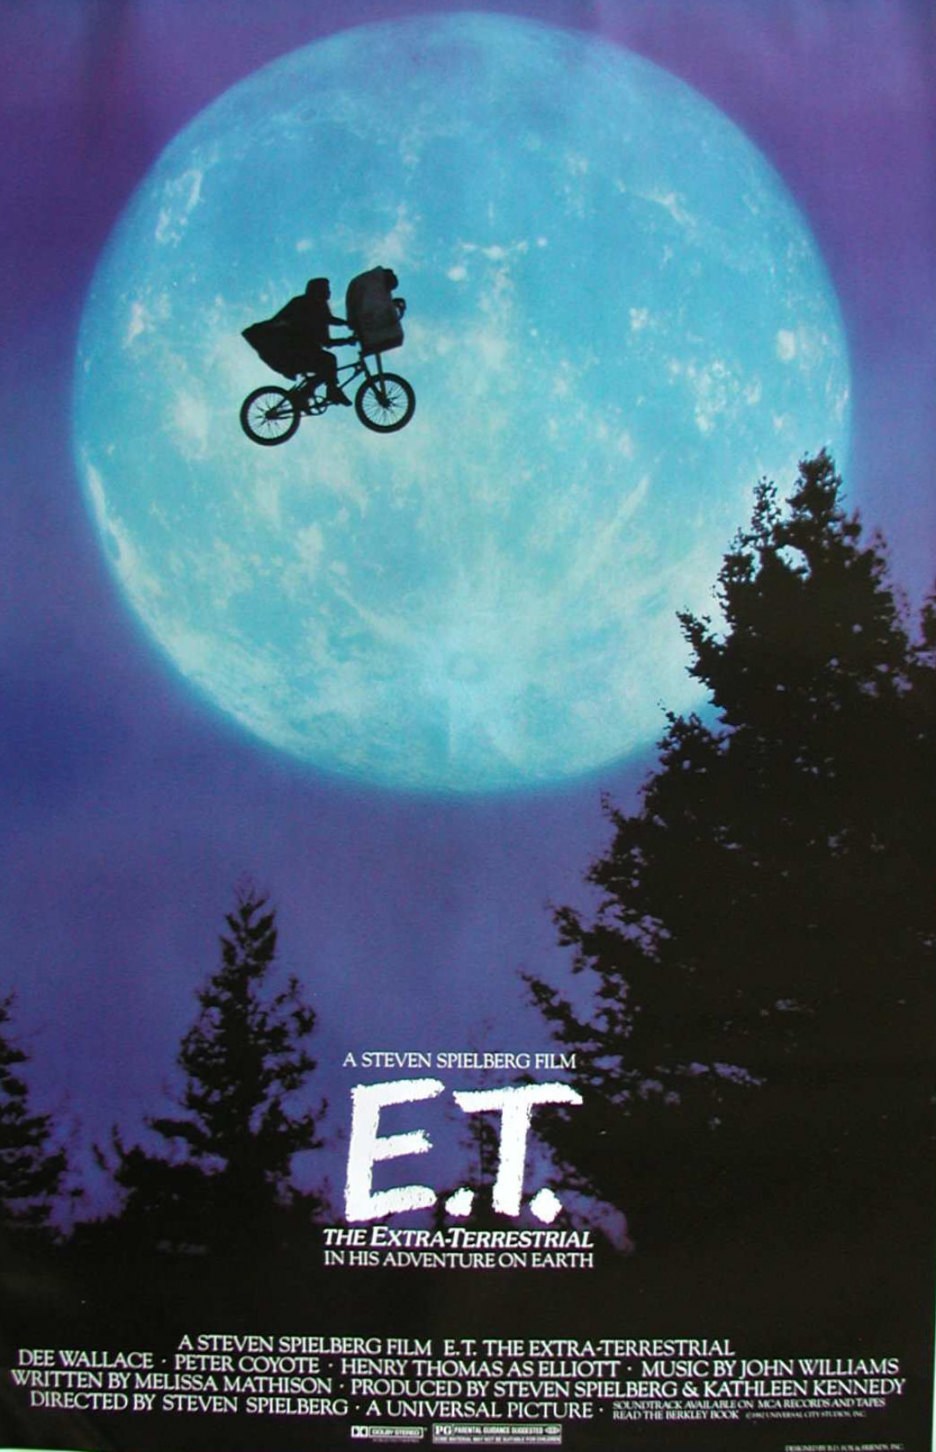 936full-e.t.-the-extra-terrestrial-poster